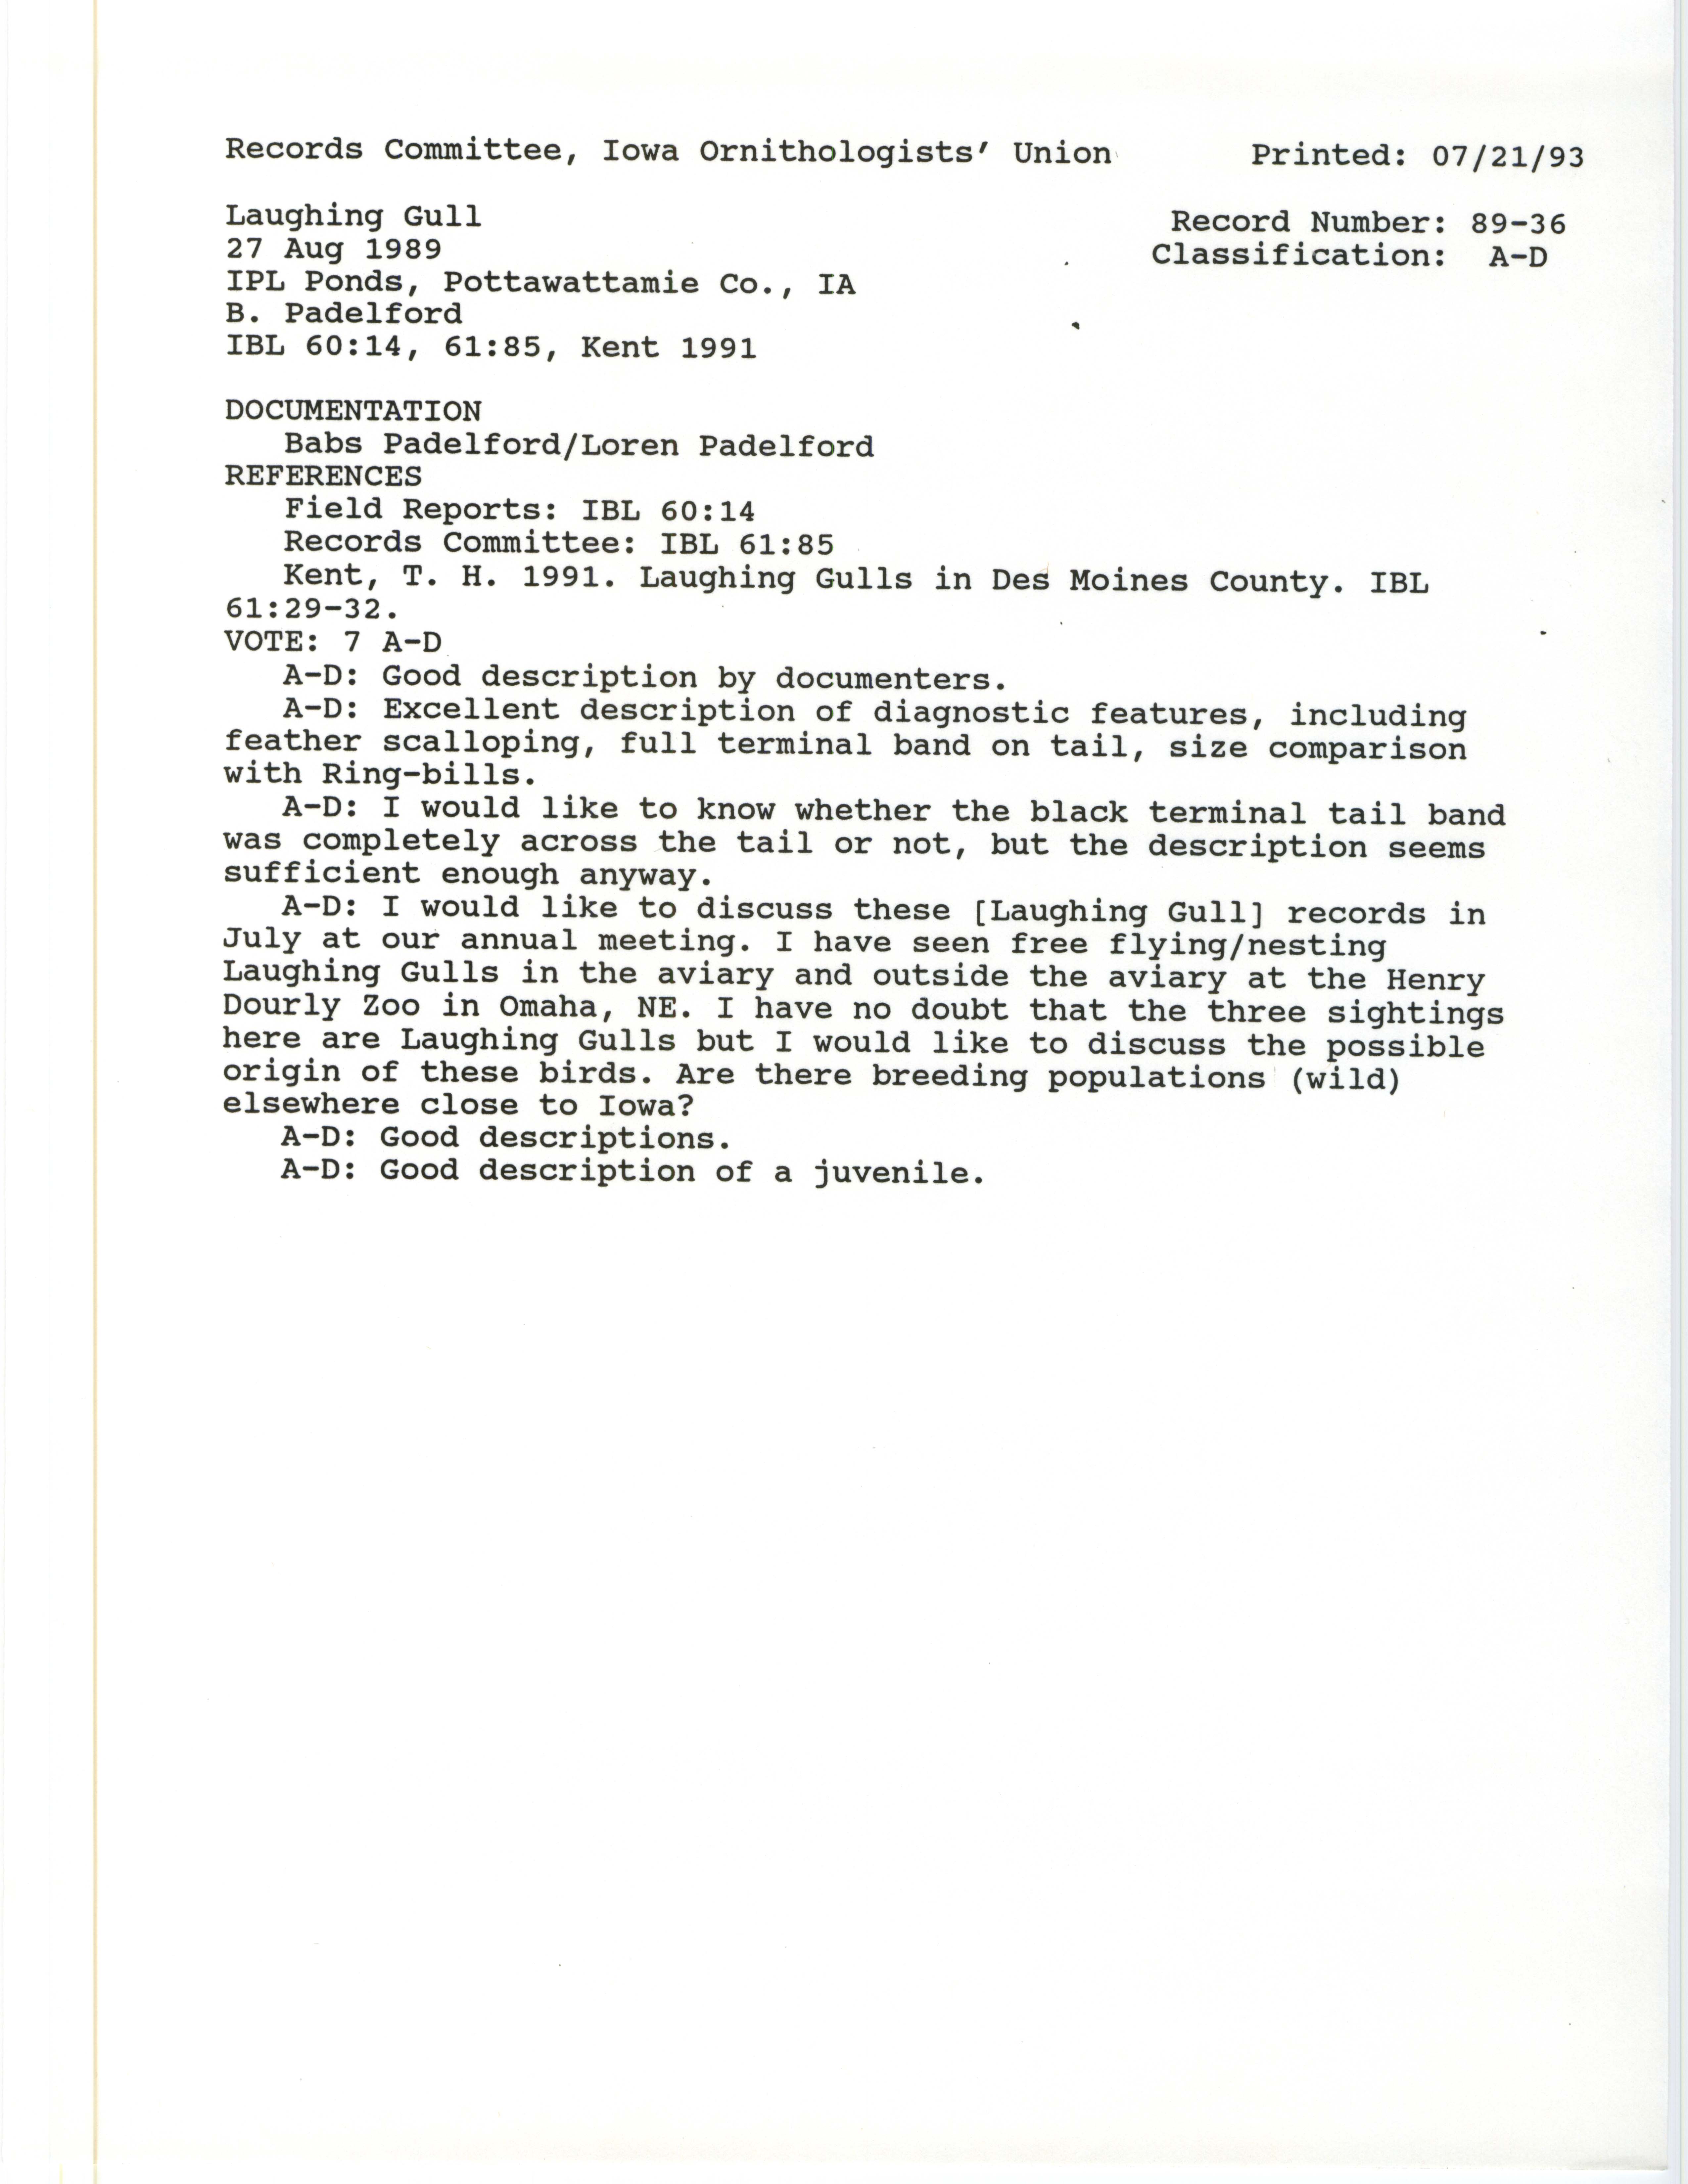 Records Committee review for rare bird sighting of Laughing Gull at IPL ponds, 1989